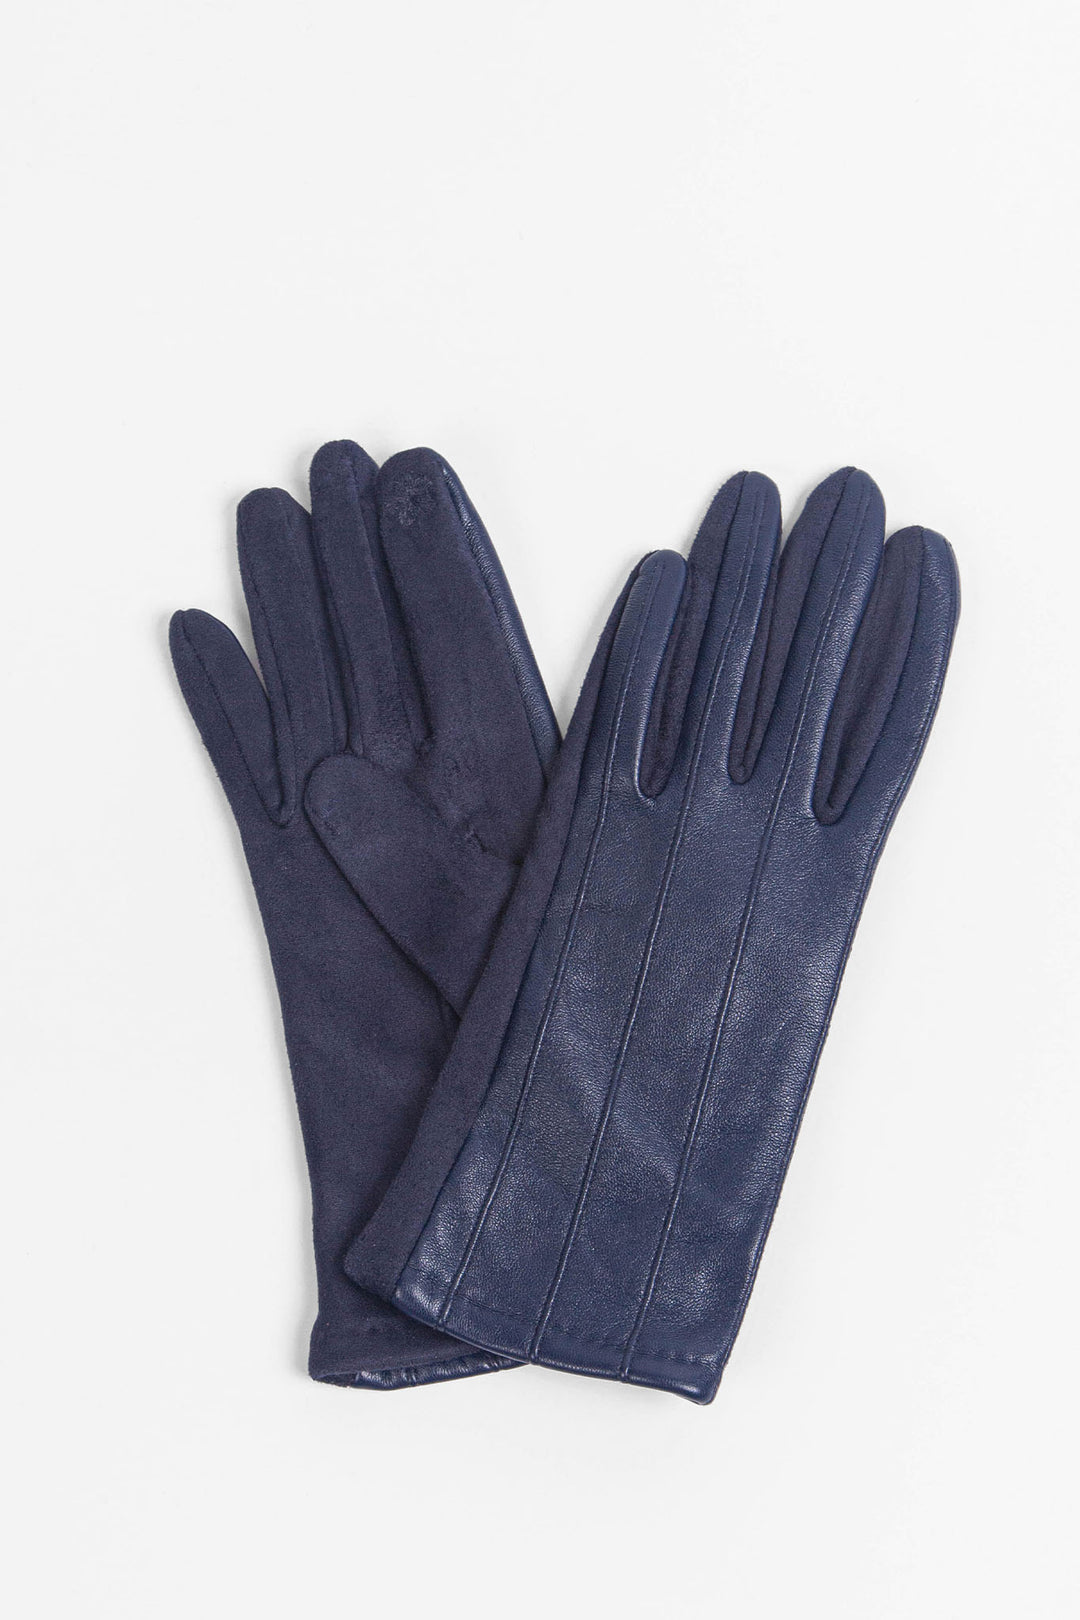 navy blue faux leather gloves with vertical  stitching on the wrists, the gloves have an embroidered detail on the index finger making them touch screen compatible